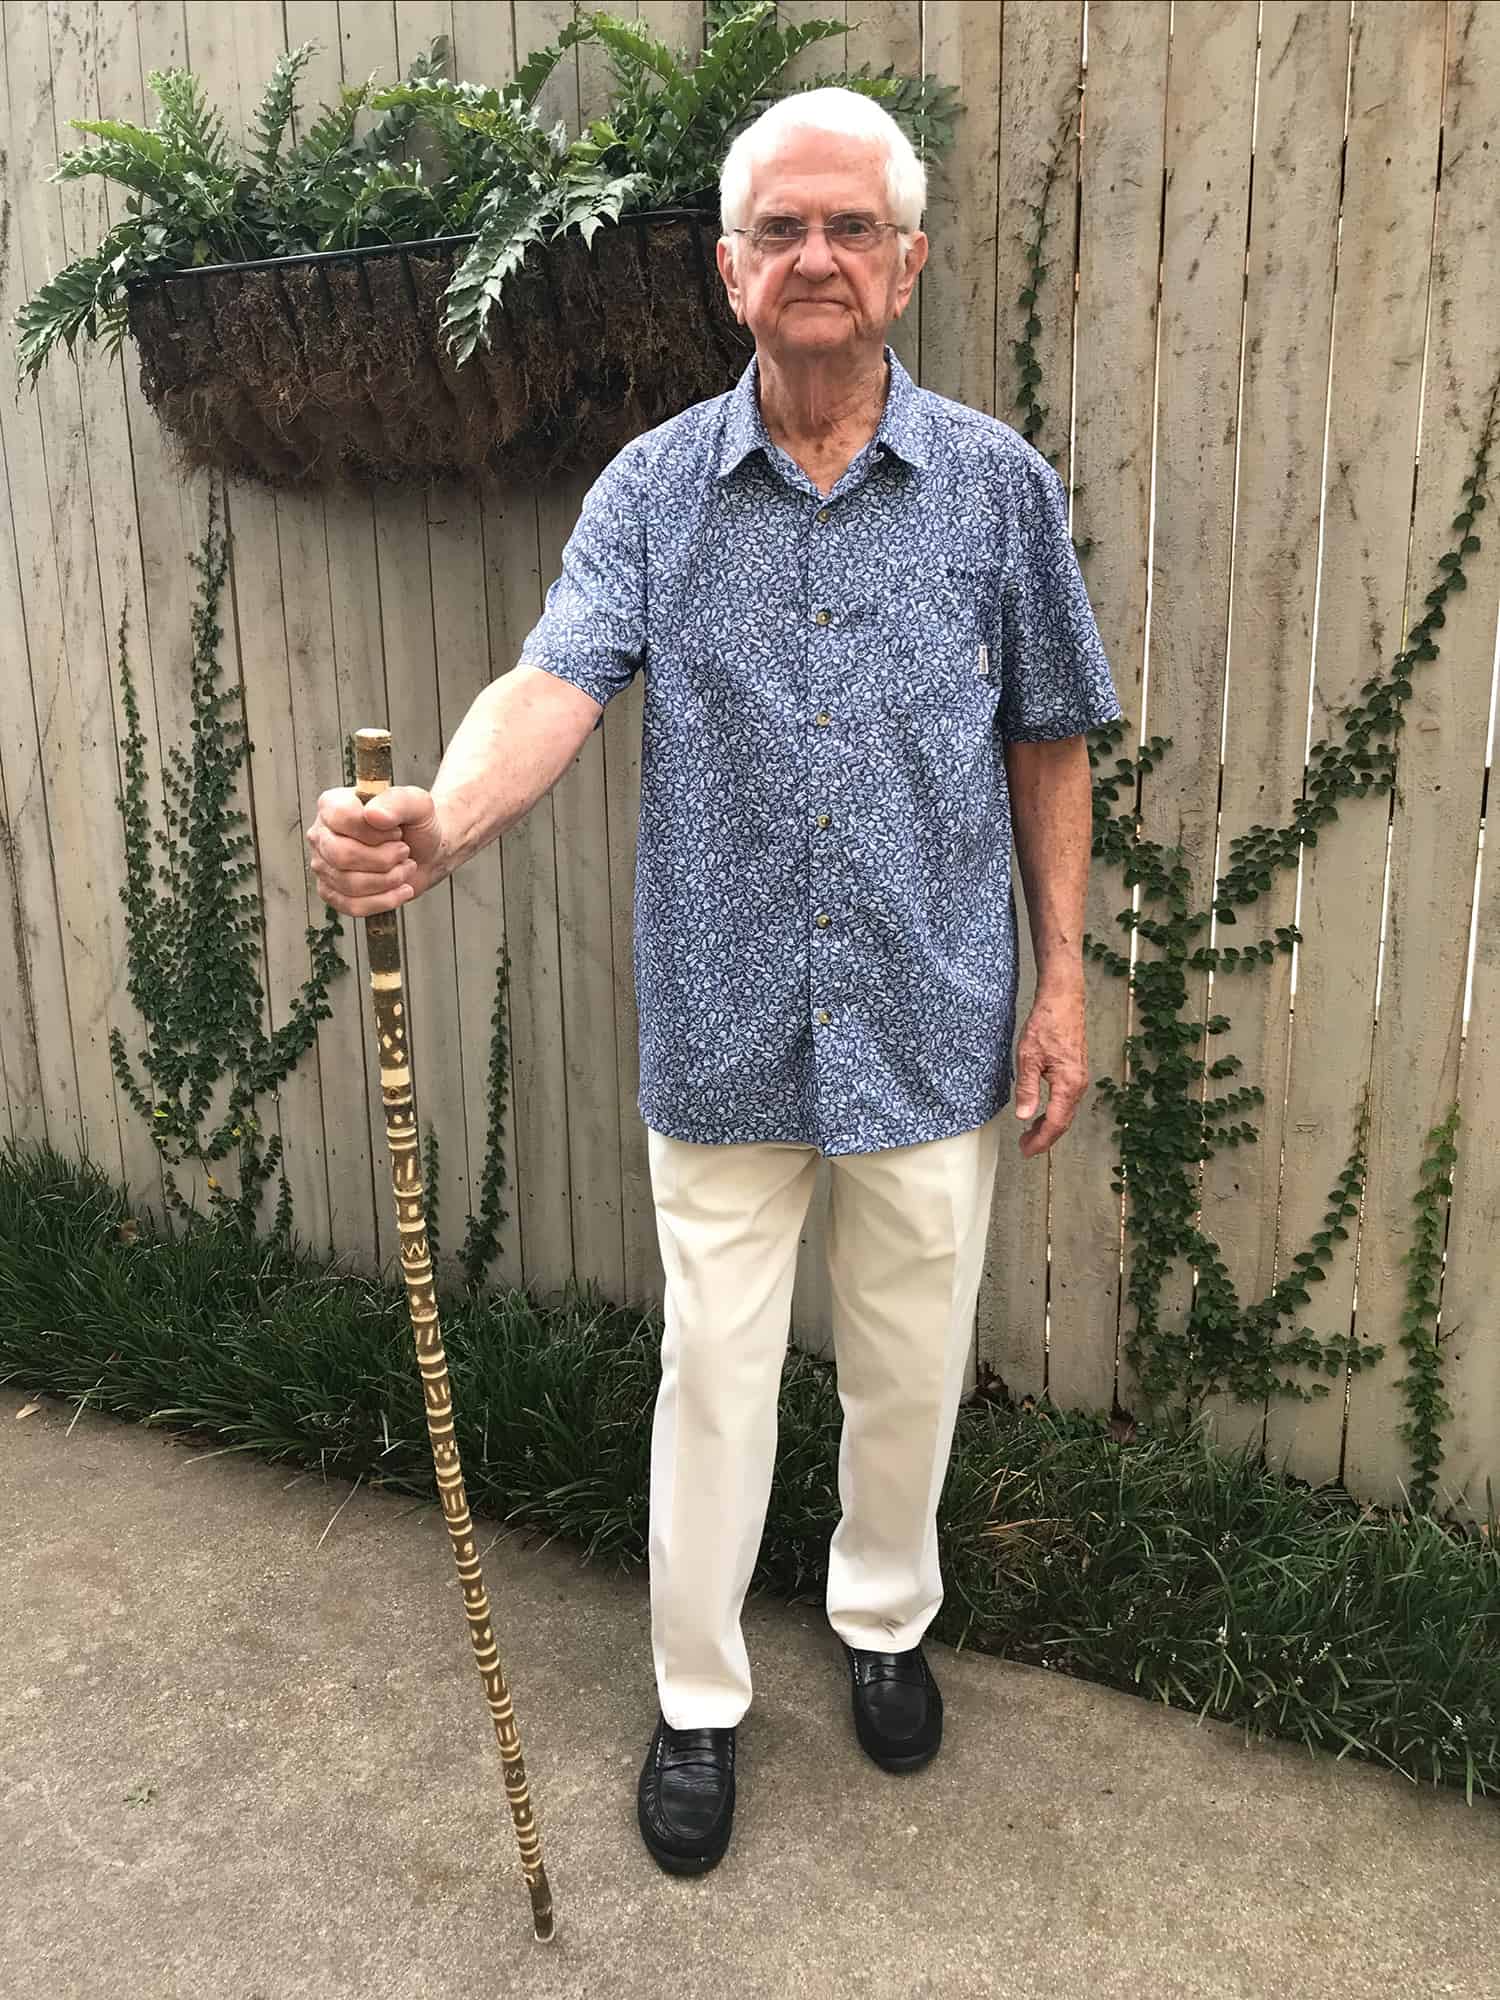 Bill dotson standing outside with his cane